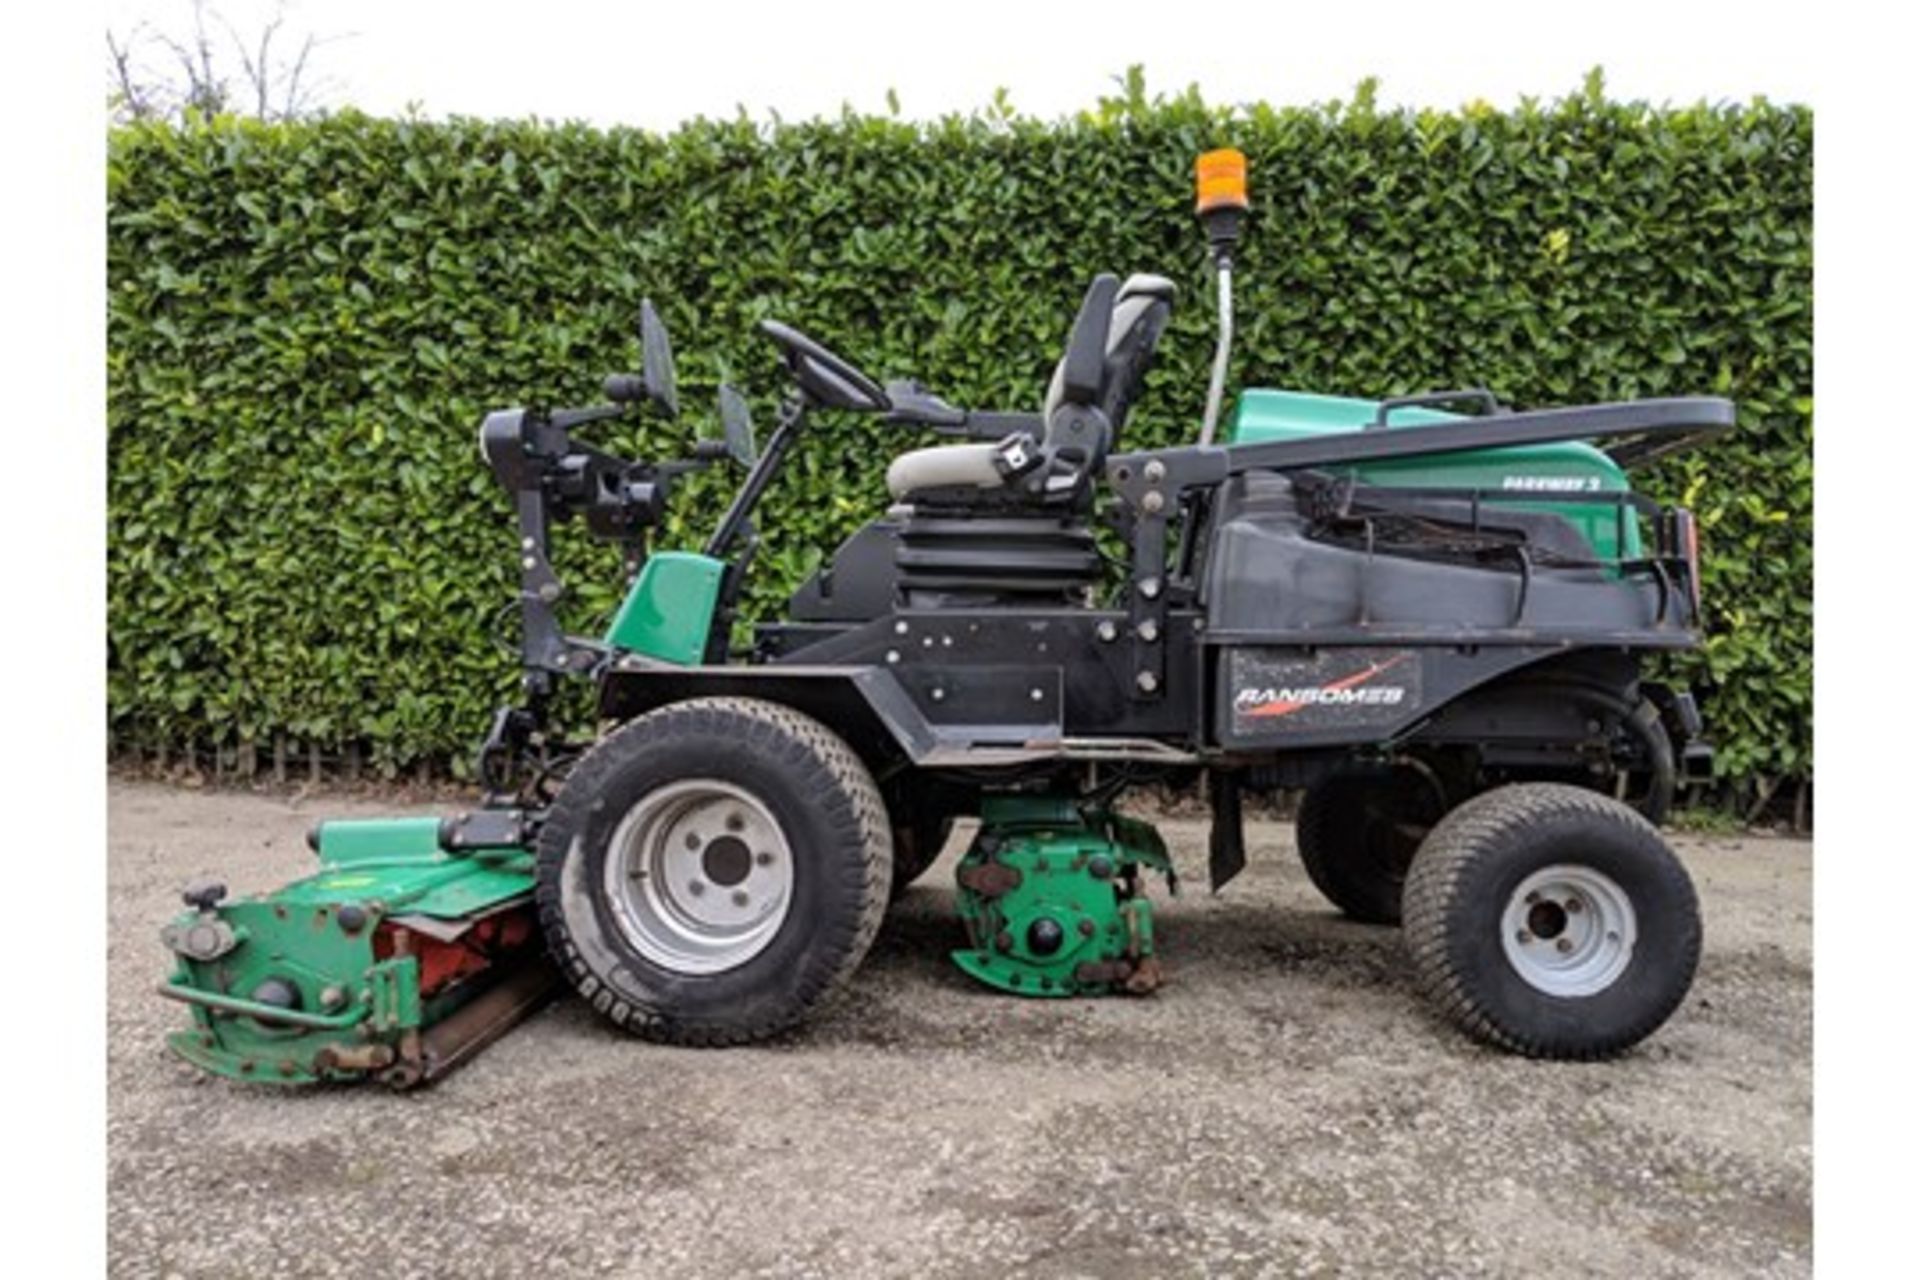 2012 Ransomes Parkway 3 4WD Triple Cylinder Mower - Image 3 of 8